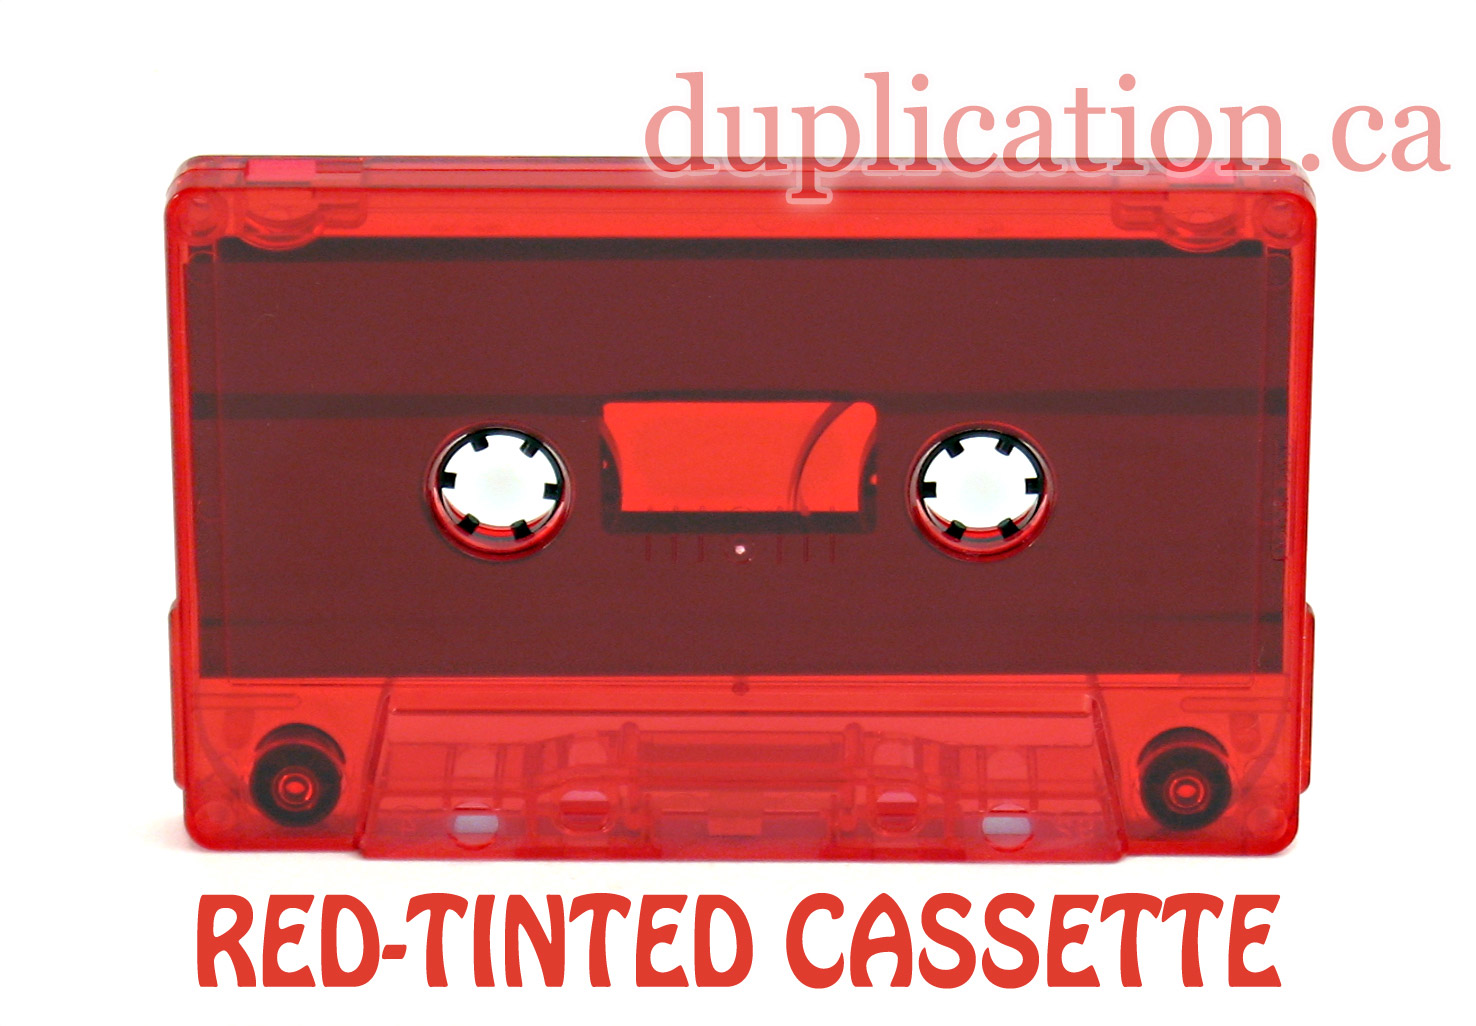 red-tinted audio cassette